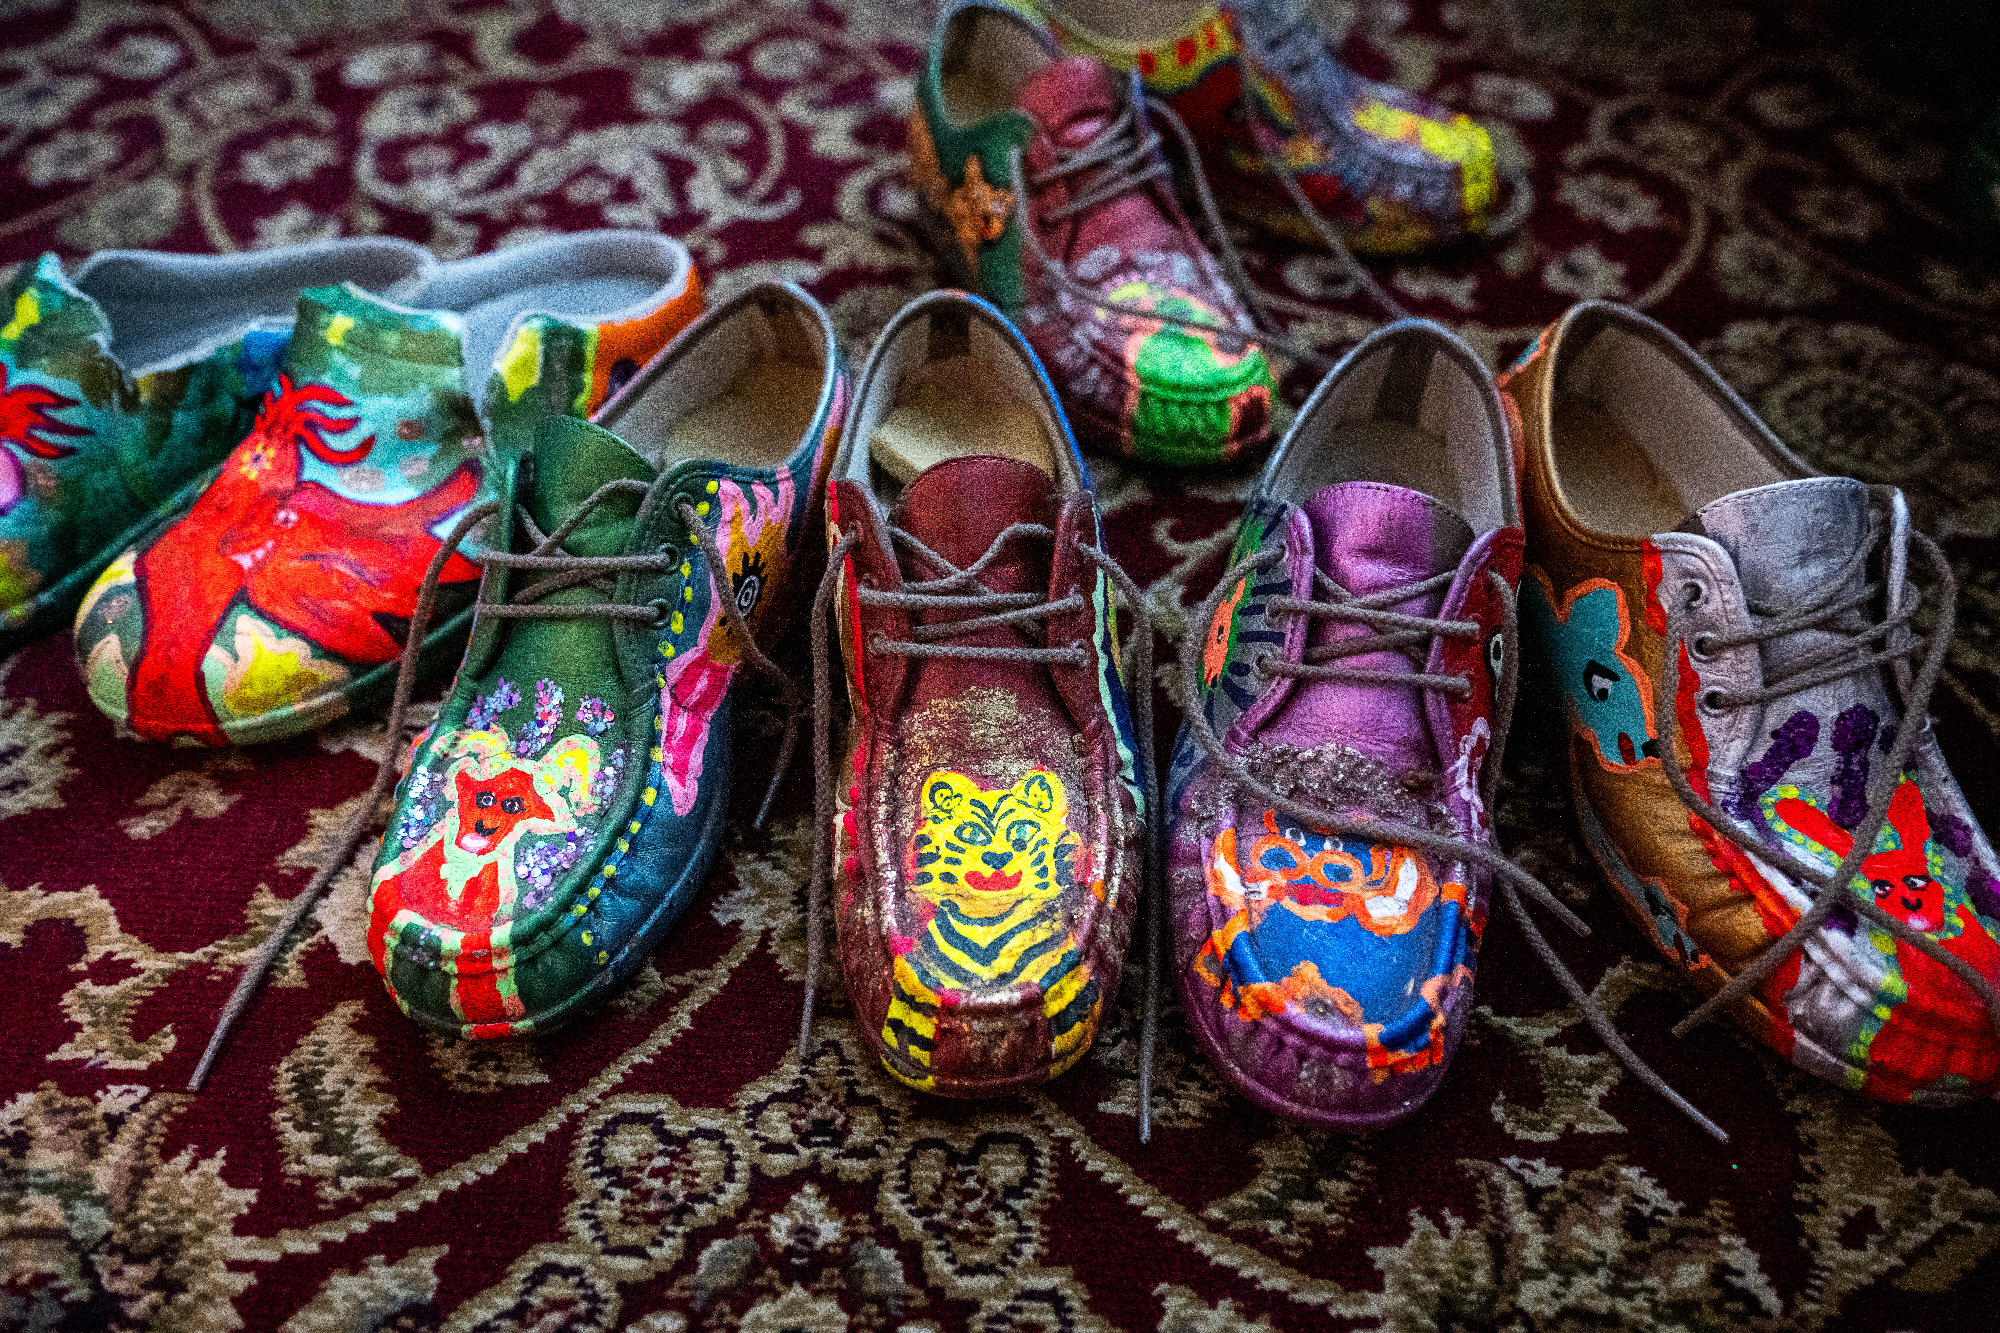 Eight shoes with painted animal designs on the toes on a patterned rug